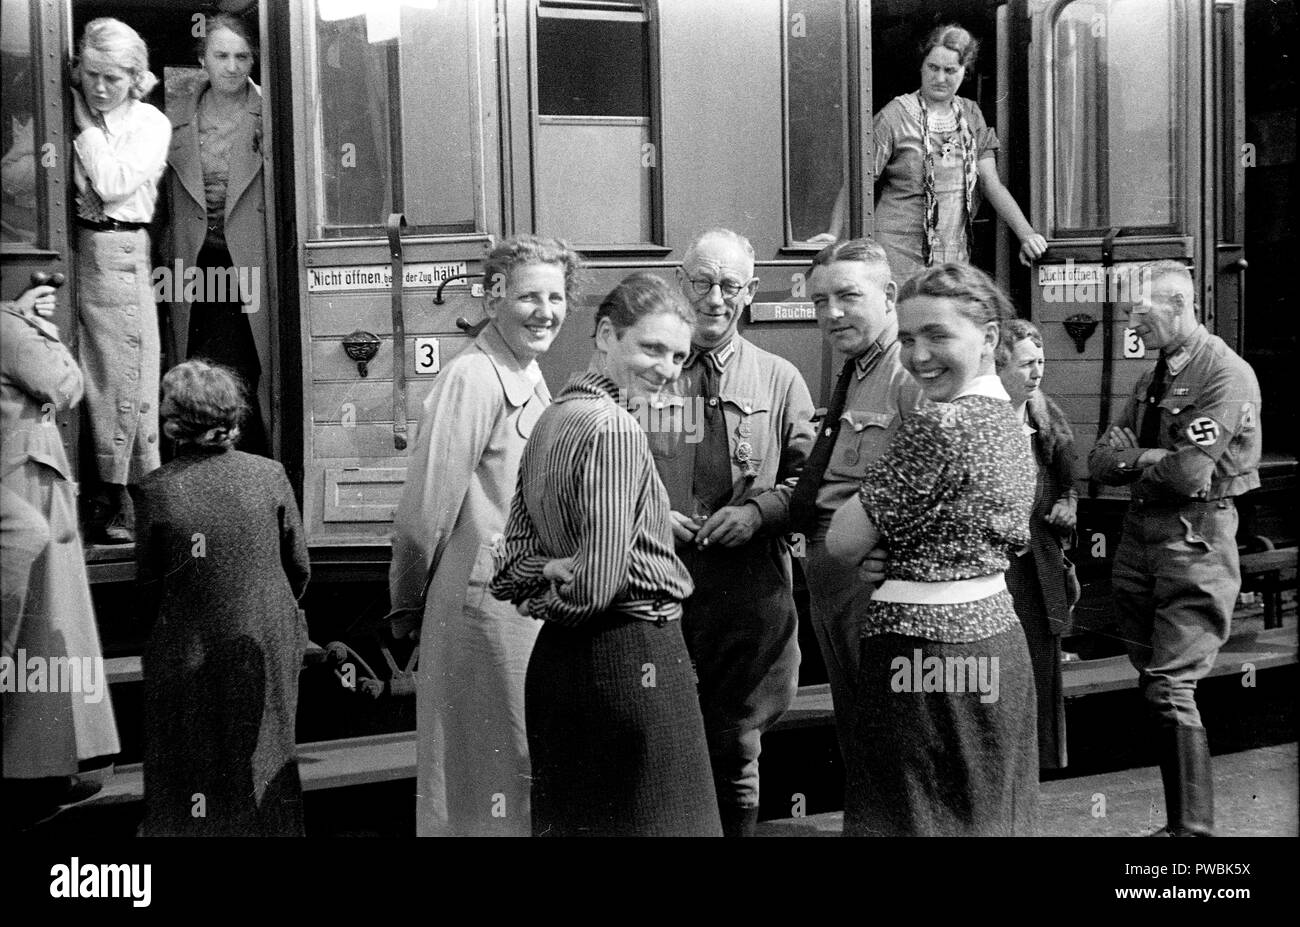 Germans arriving at Nuremberg railway station for the Nazi Germany NSDAP Nuremberg Rally 1936 Parade at the rally ground 10th September 1936 Stock Photo